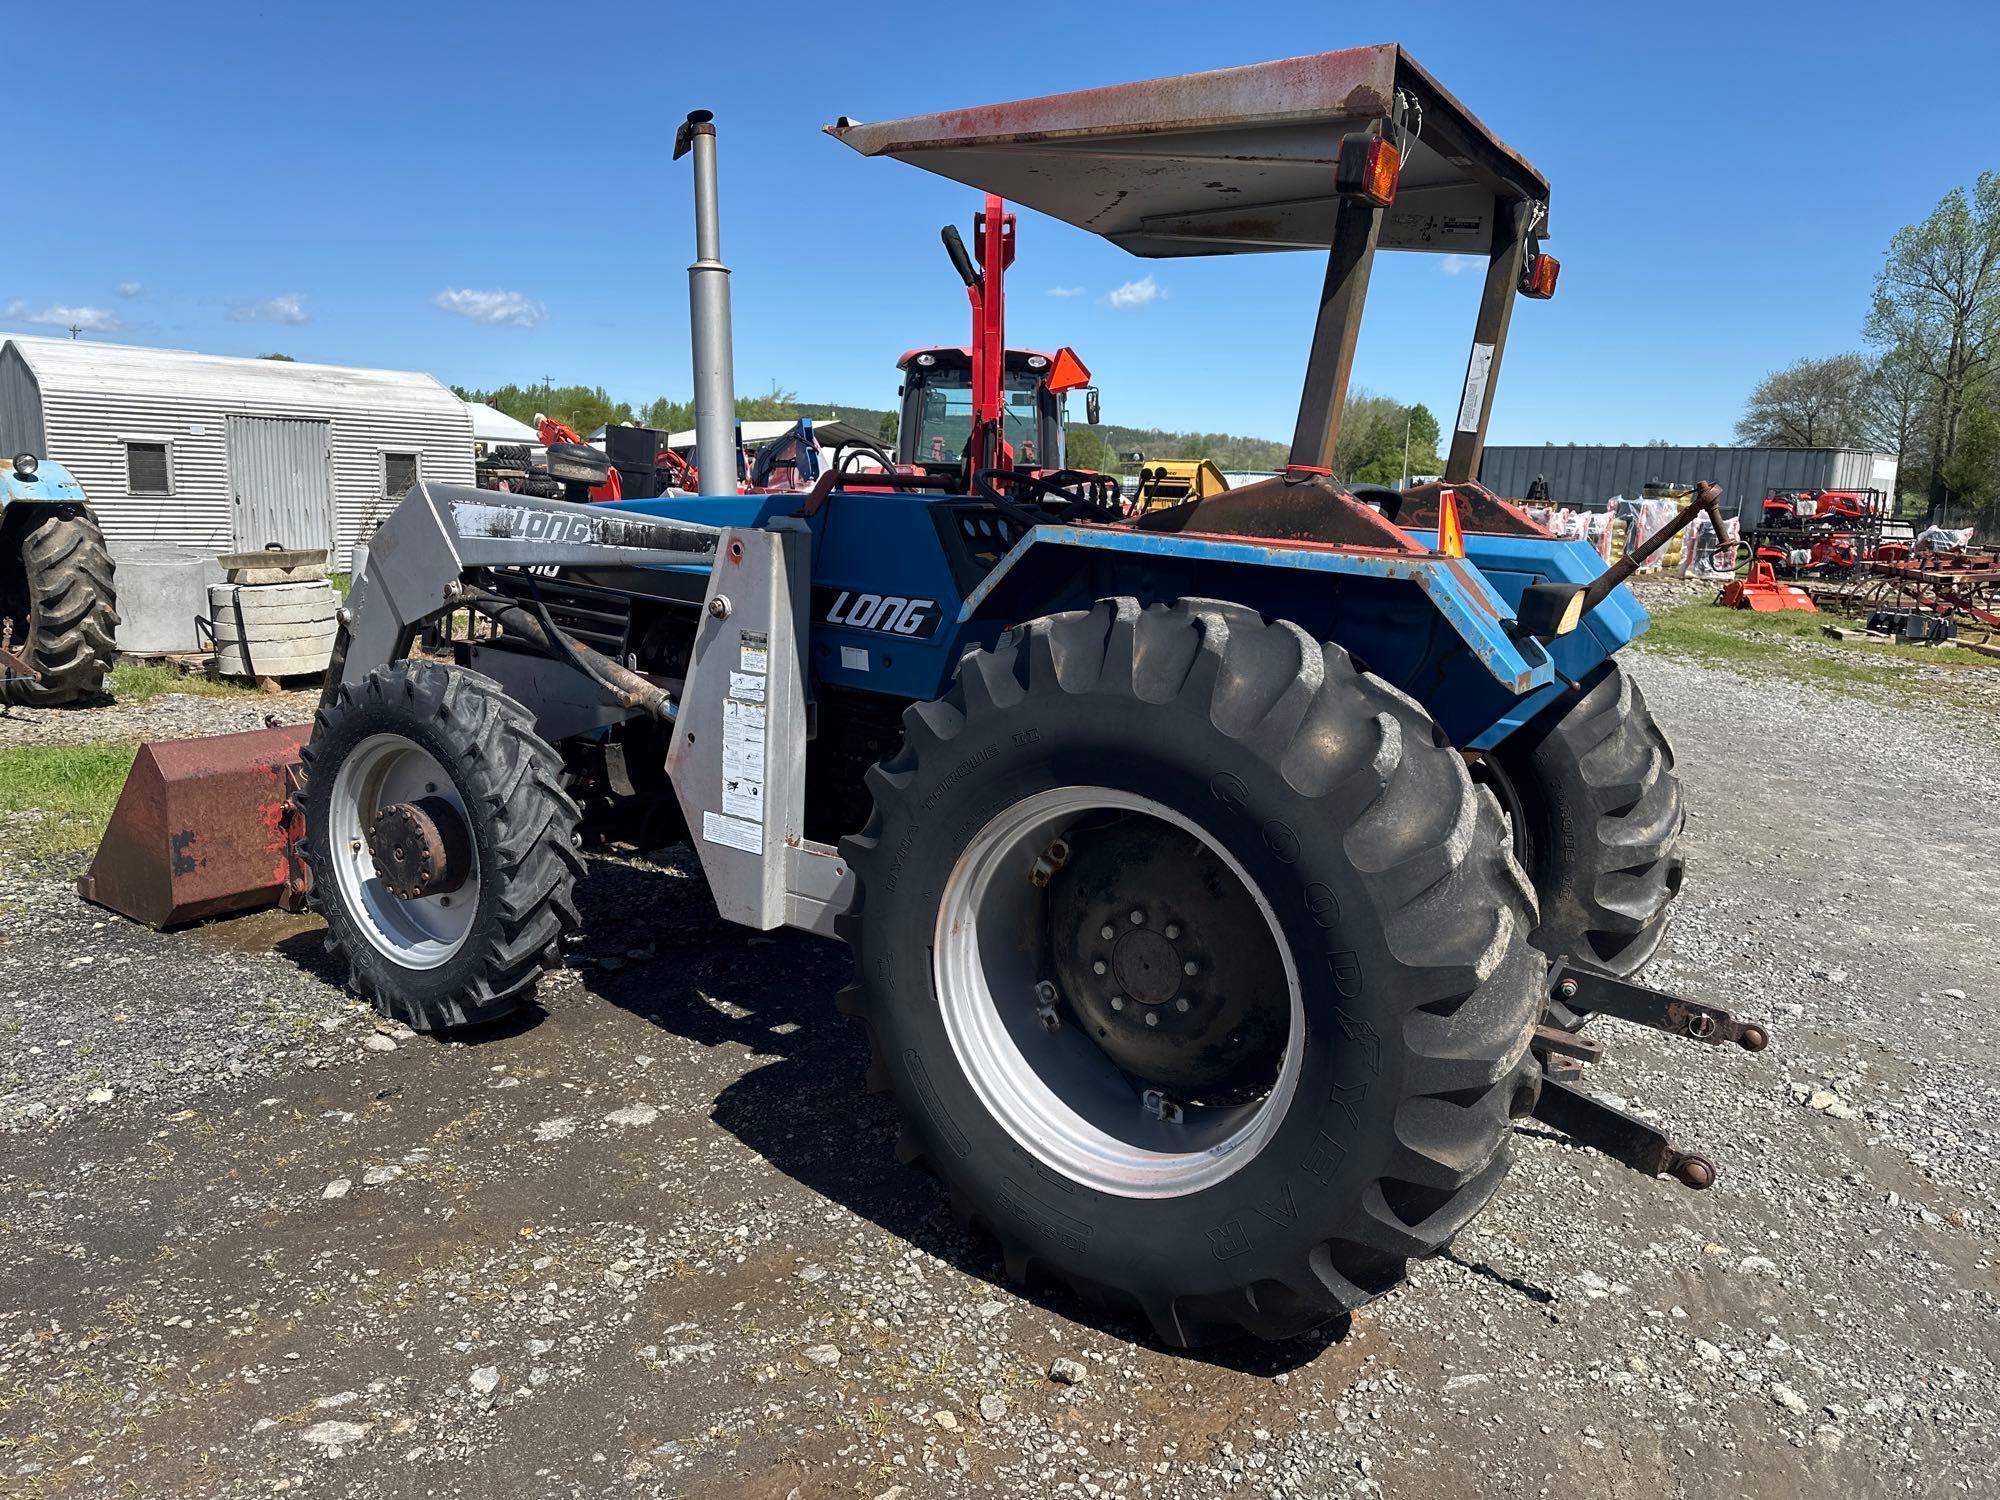 LONG 2054 (2610 DTC) 2WD TRACTOR WITH LOADER